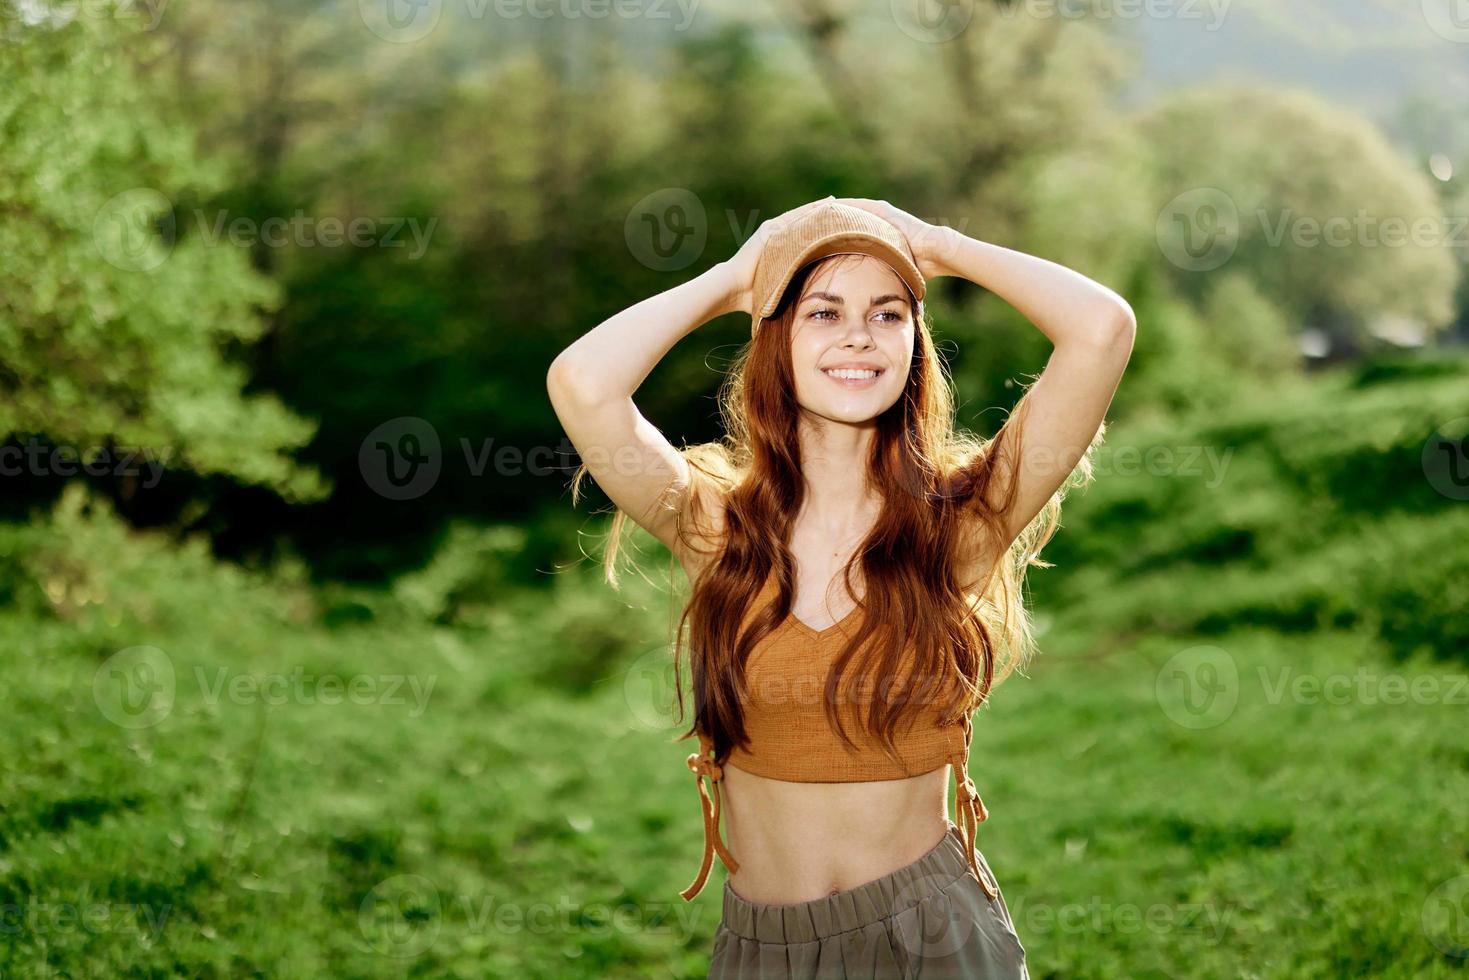 A young woman with an athletic body walks in a summer green park in nature. Sunset sunlight illuminates her red hair photo